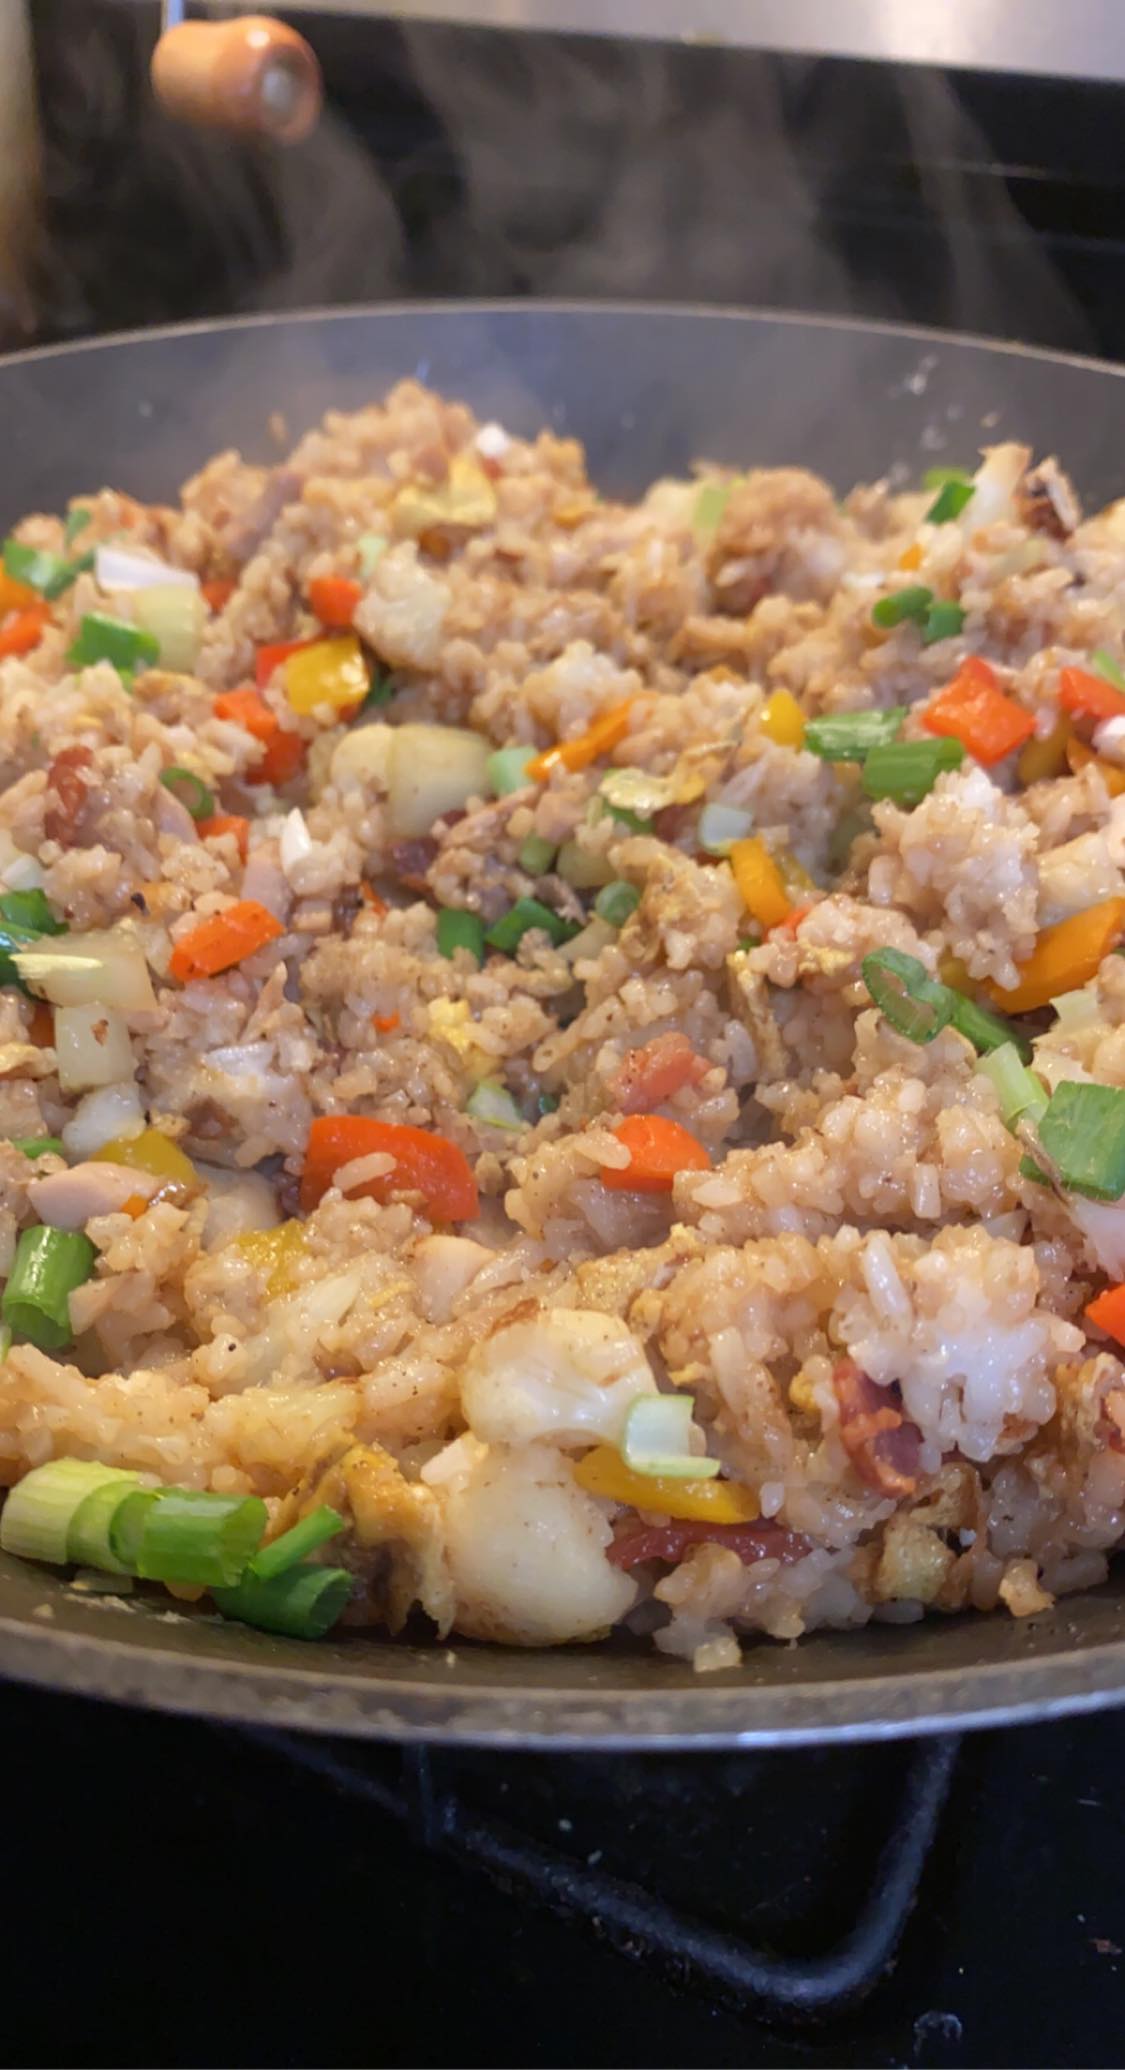 Passport for Your Palate-“Garbage” Fried Rice